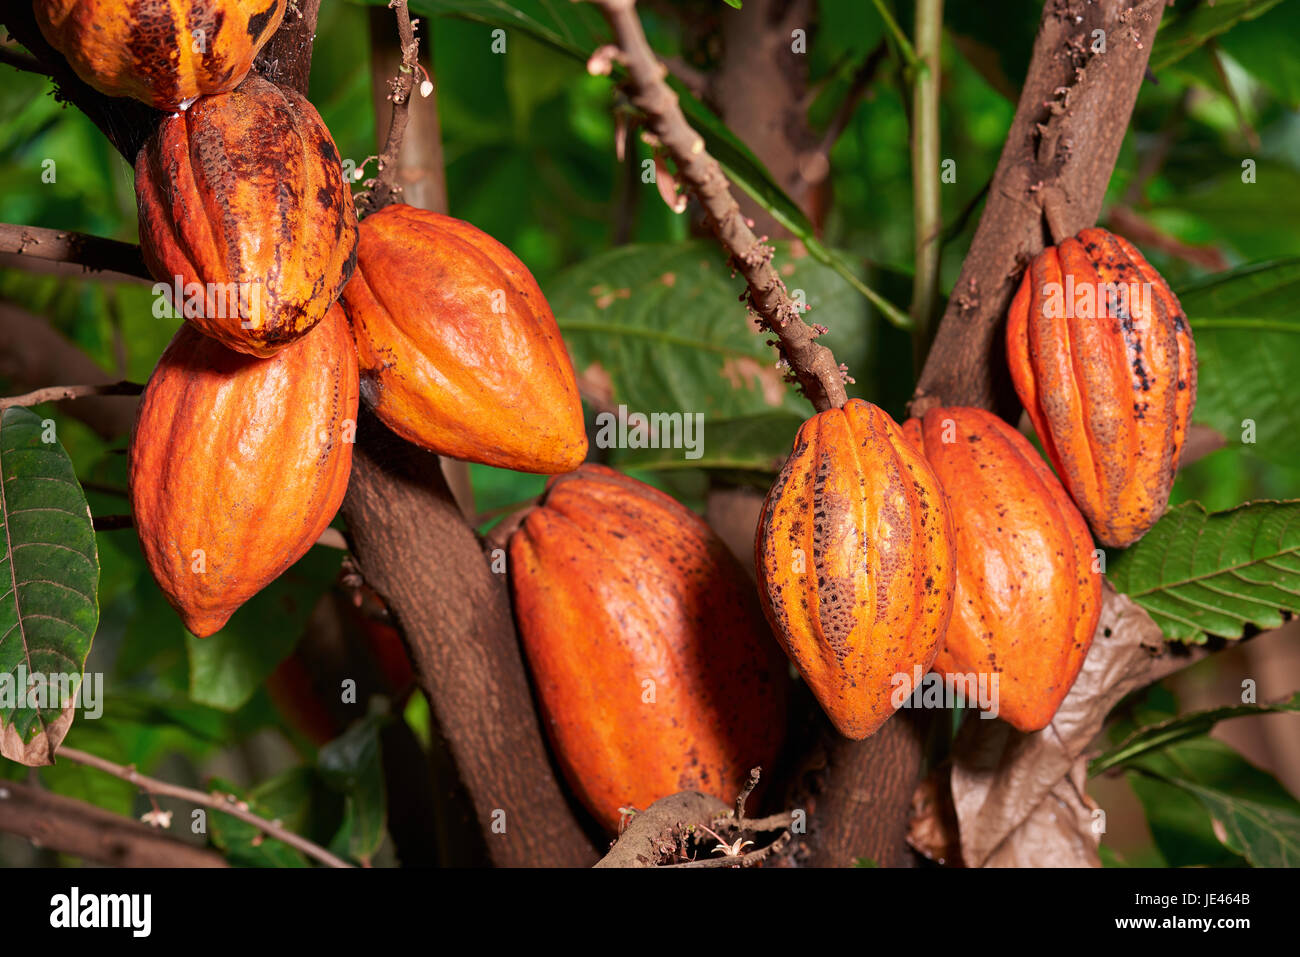 Big group cacao pods hanf on tree. Orange color cocoa fruit pods close-up Stock Photo